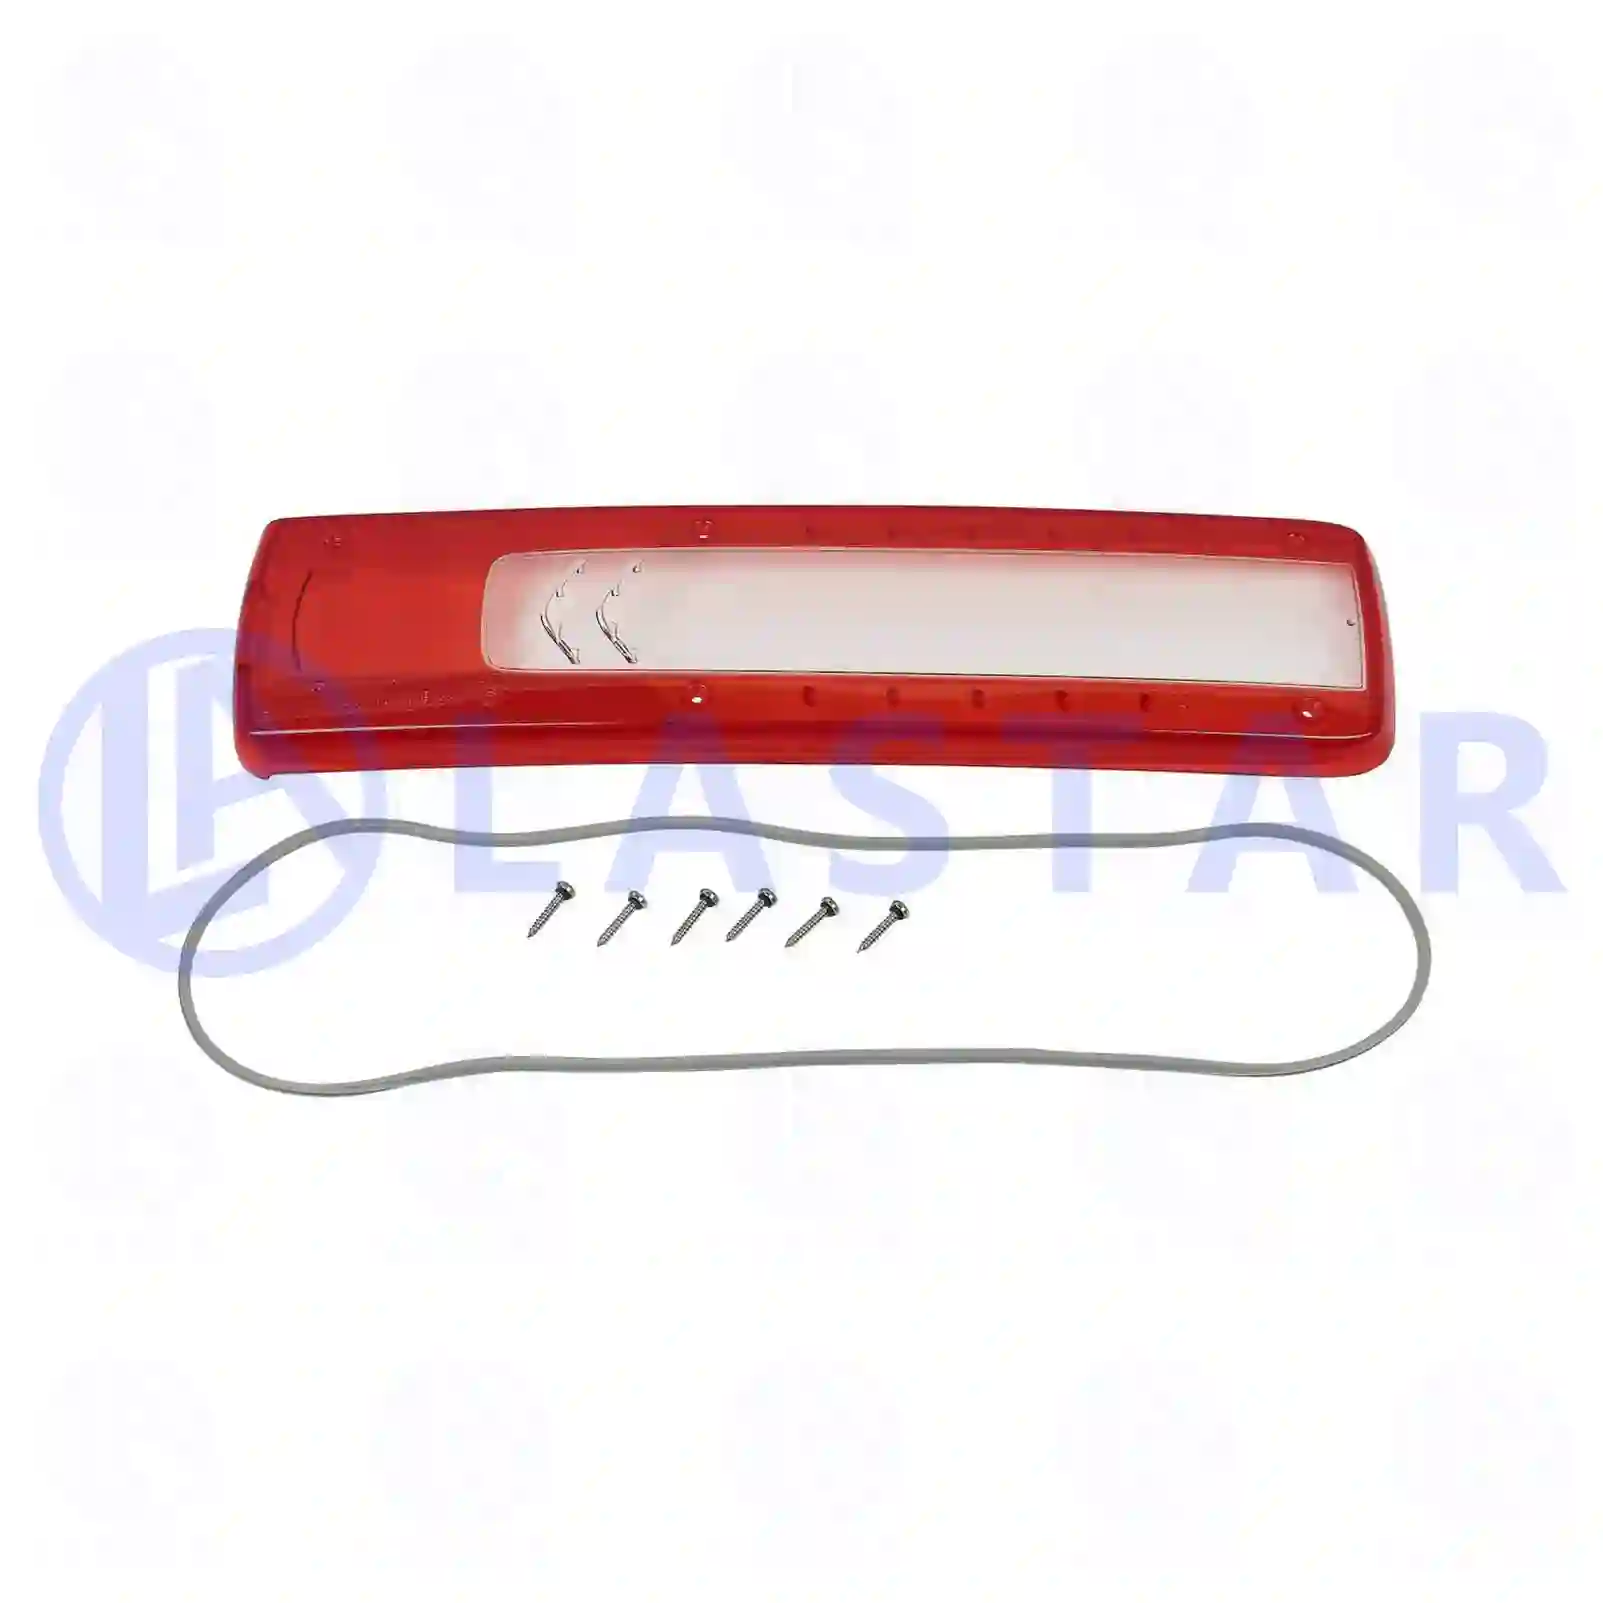 Tail lamp glass, 77711084, 7422800391, 82849 ||  77711084 Lastar Spare Part | Truck Spare Parts, Auotomotive Spare Parts Tail lamp glass, 77711084, 7422800391, 82849 ||  77711084 Lastar Spare Part | Truck Spare Parts, Auotomotive Spare Parts